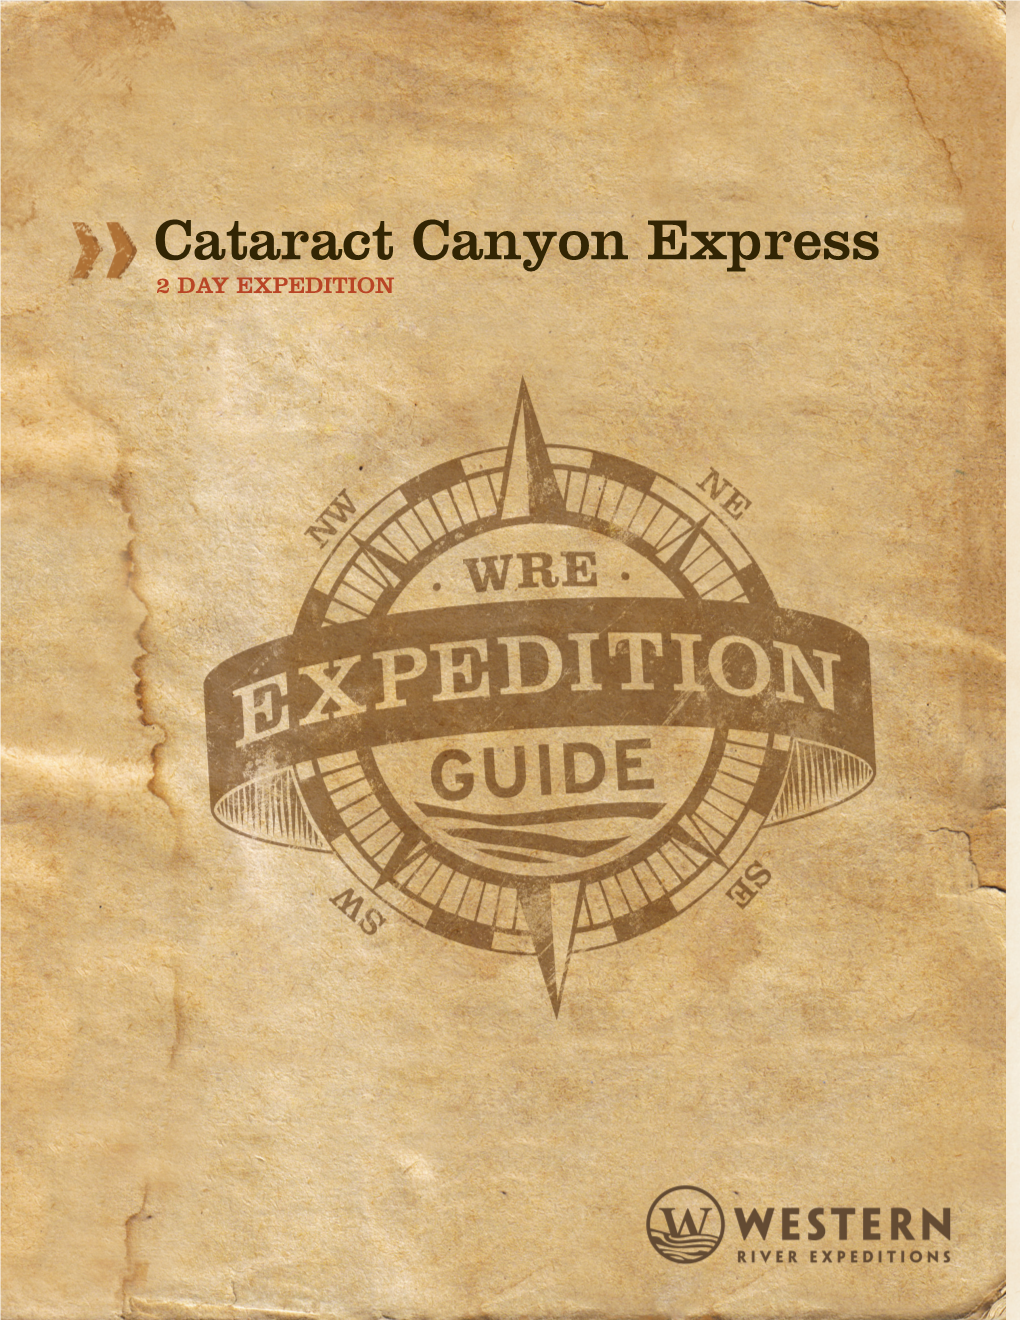 Cataract Canyon Express 2 DAY EXPEDITION